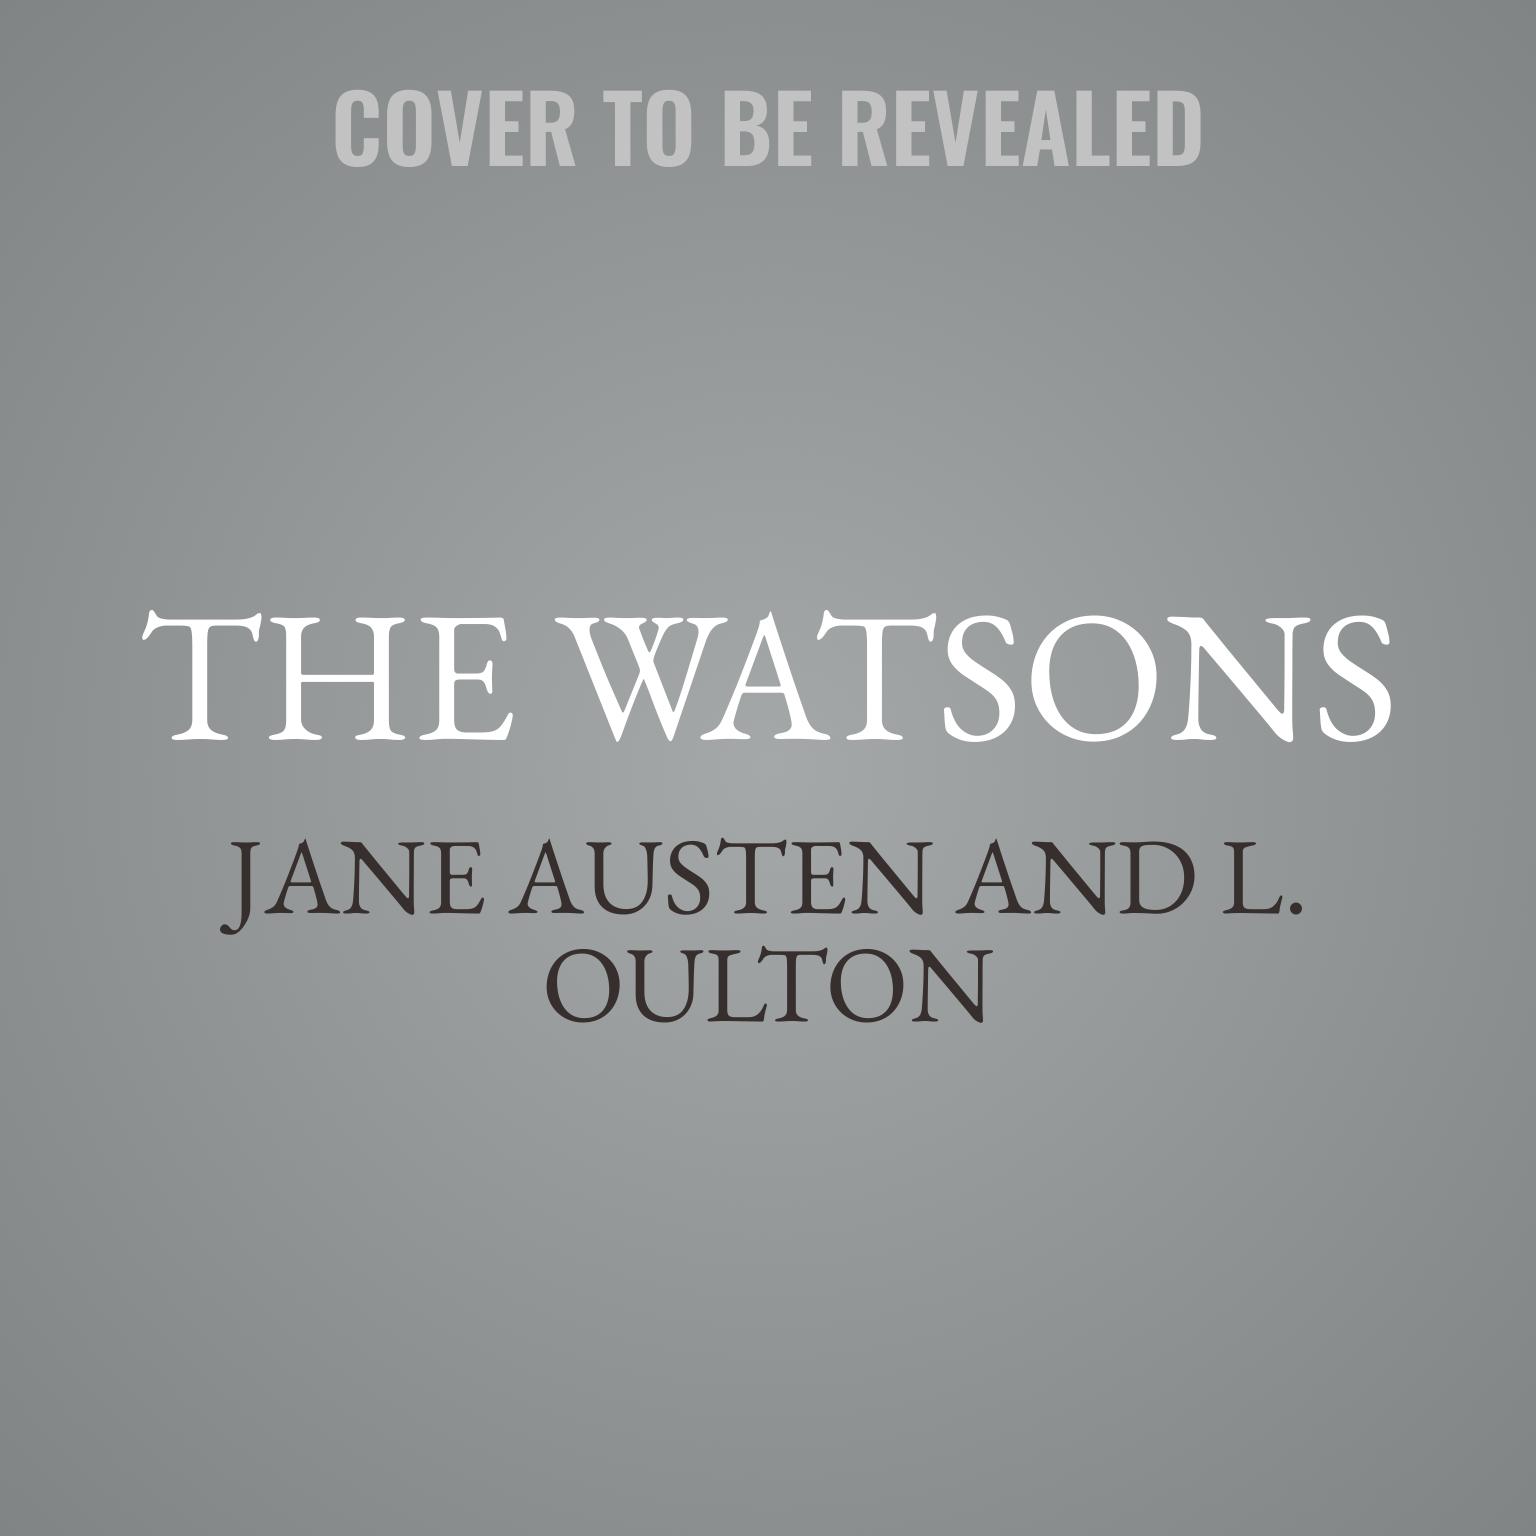 The Watsons: A fragment by Jane Austen and concluded by L. Oulton  Audiobook, by Jane Austen